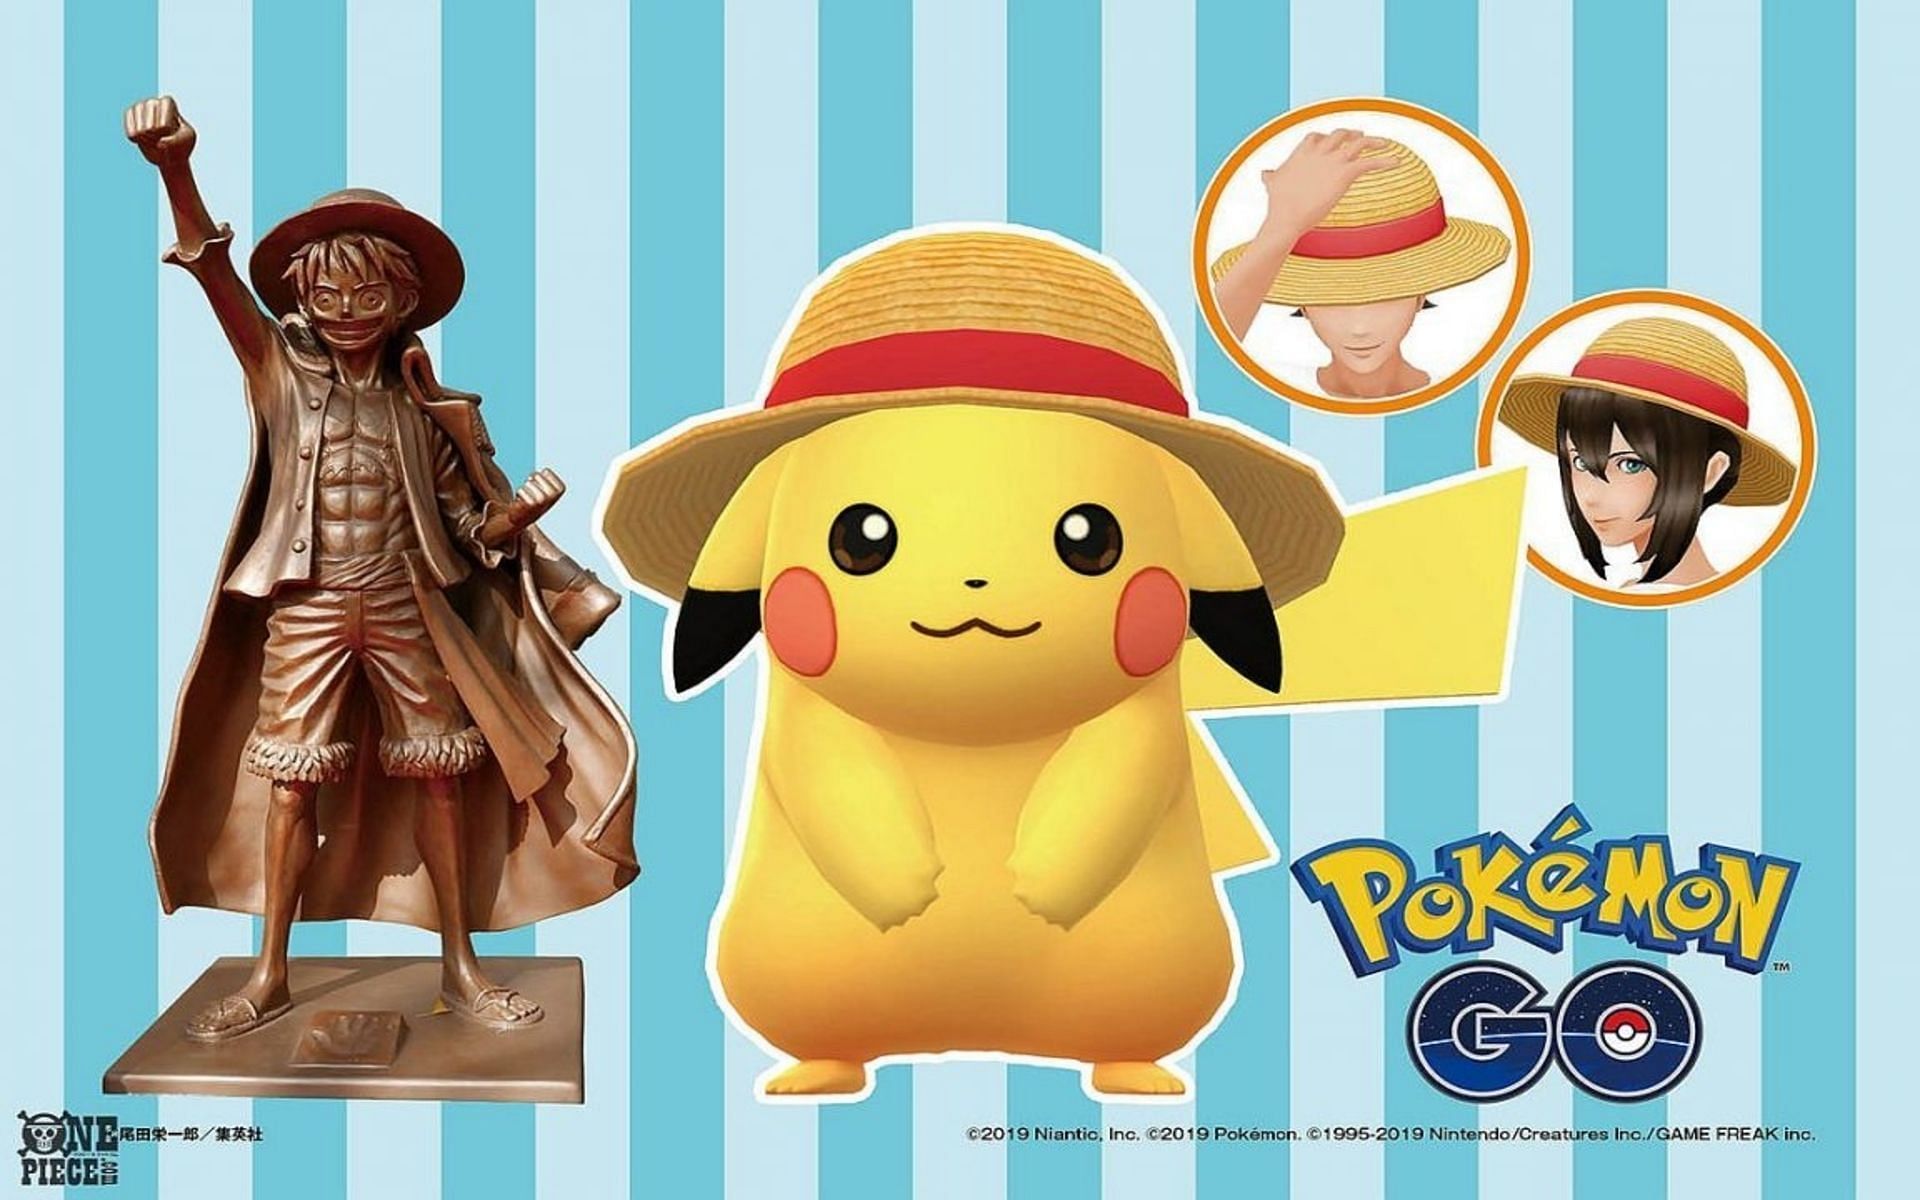 Straw Hat Pikachu resembles Luffy from One Piece (Image via Niantic)